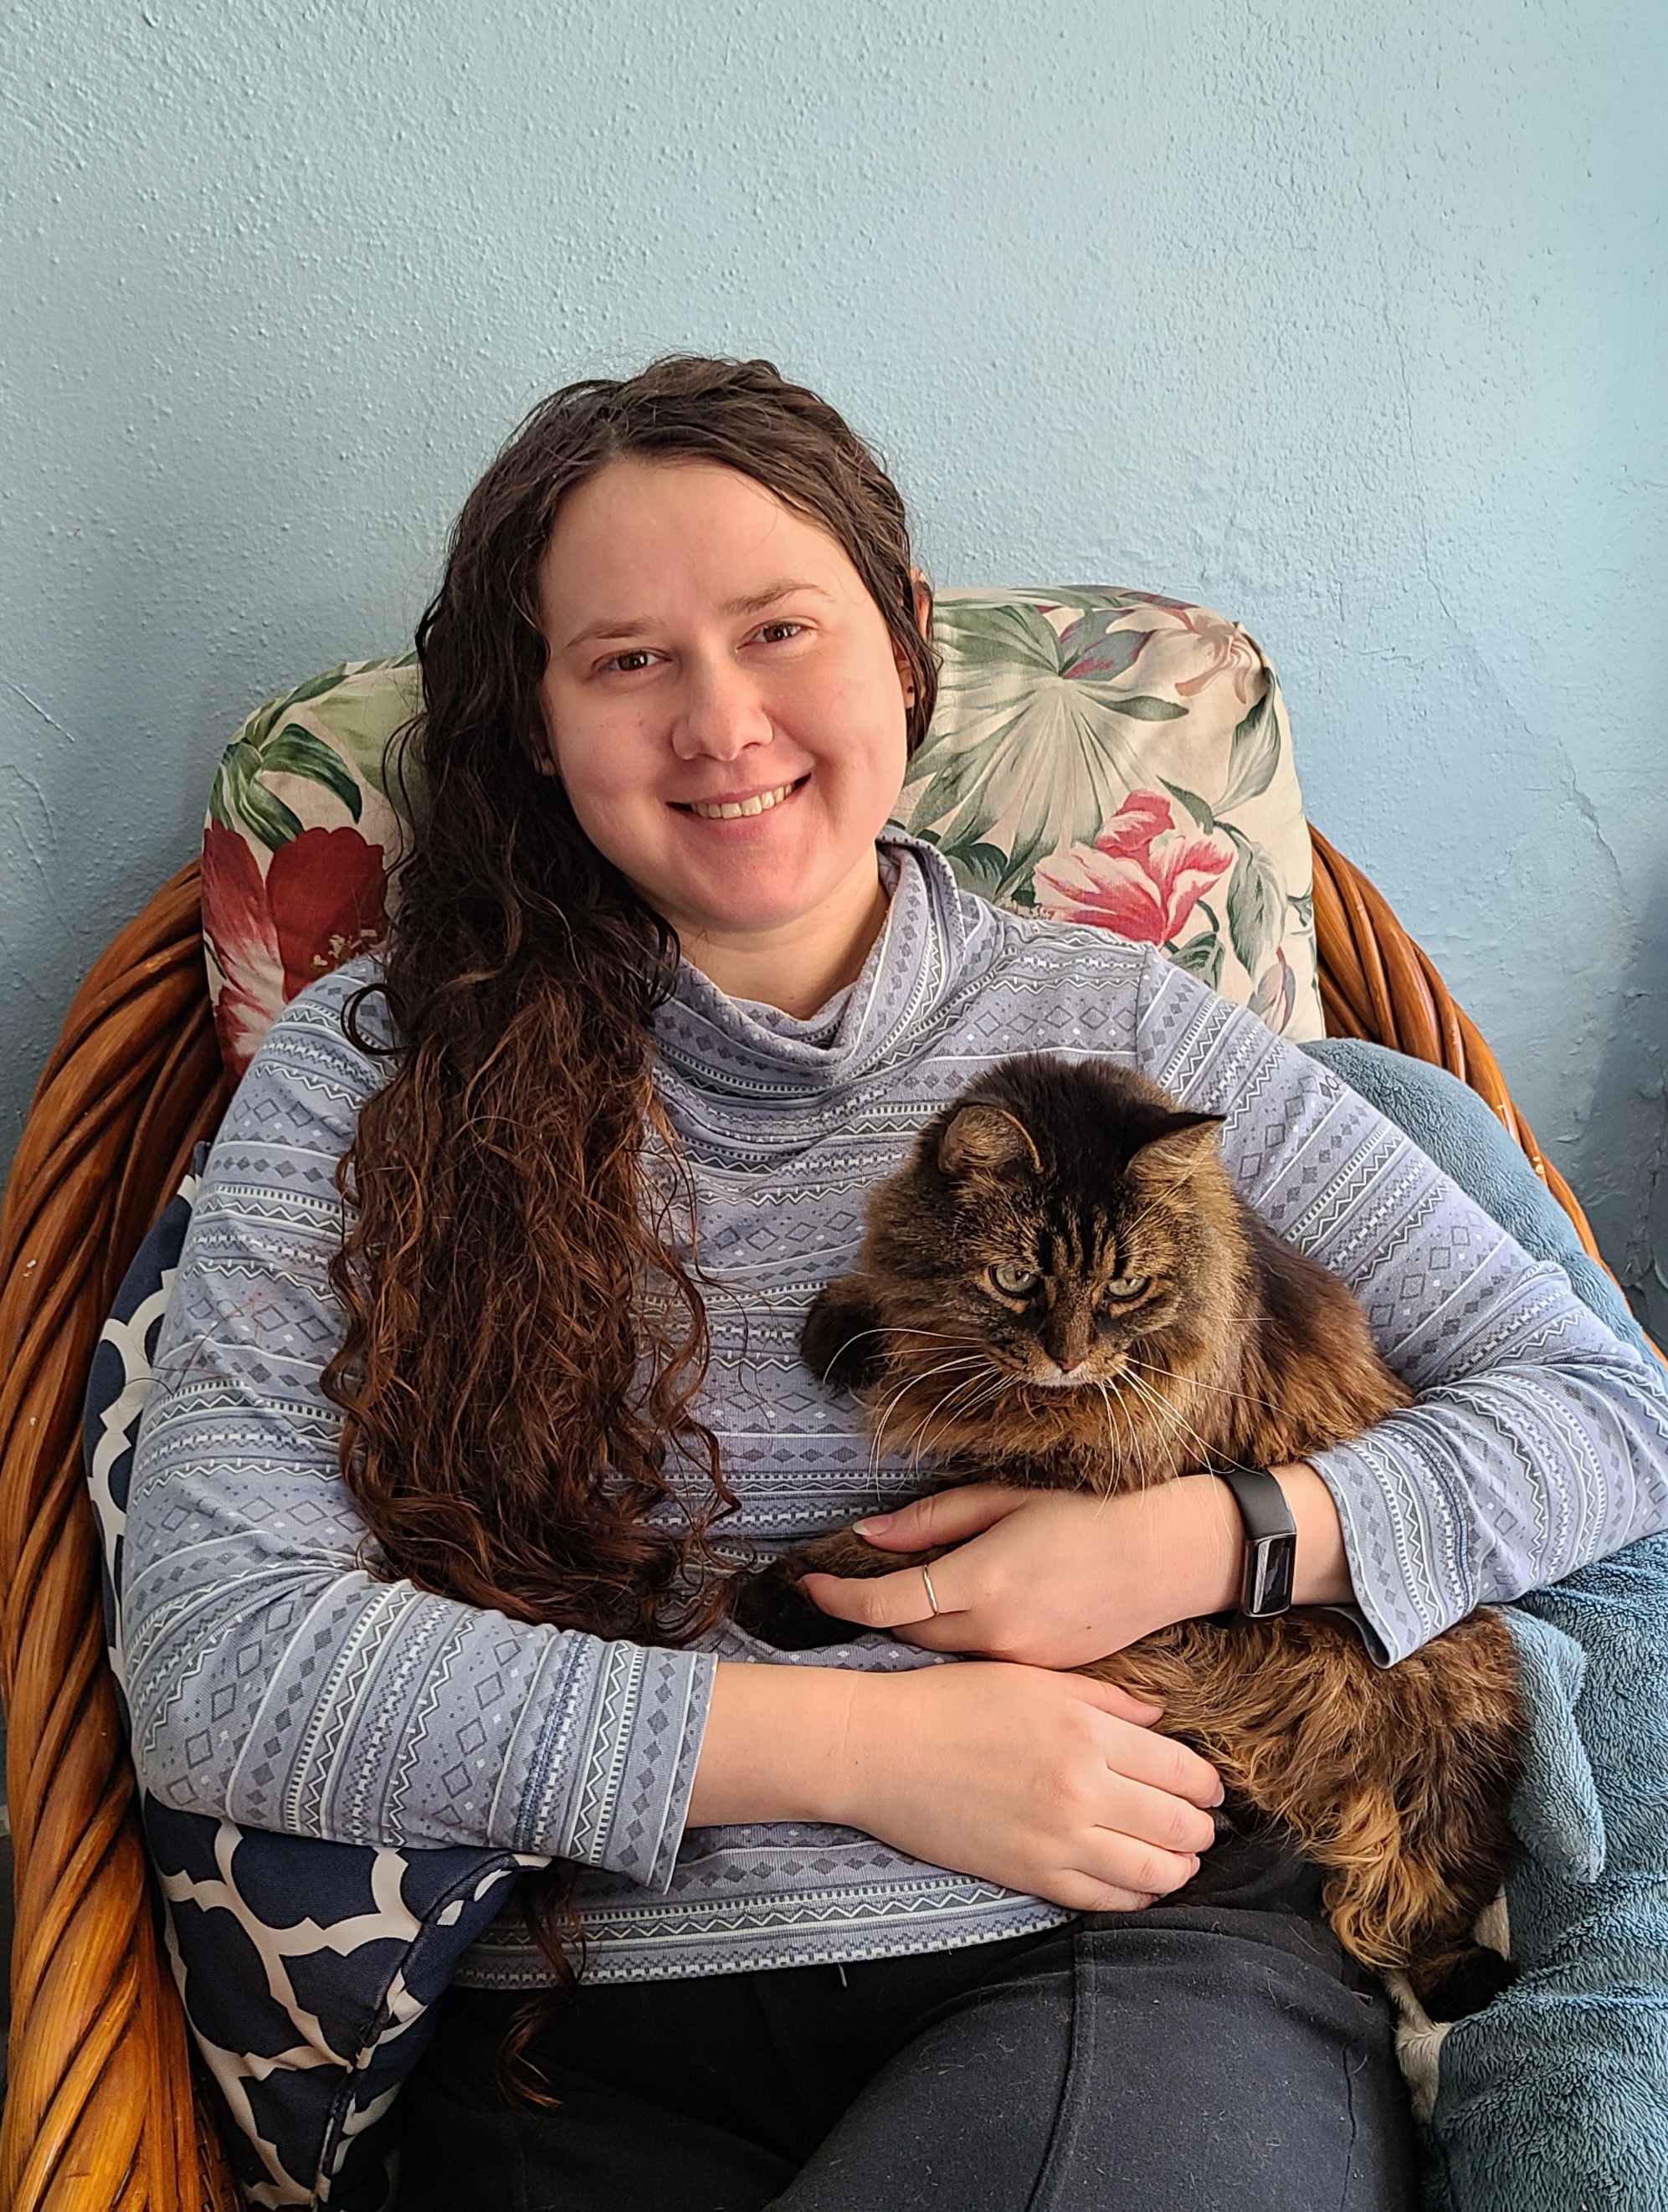 Sofiya Pisarenka sits in a wicker chair, smiling and holding a long-haired cat